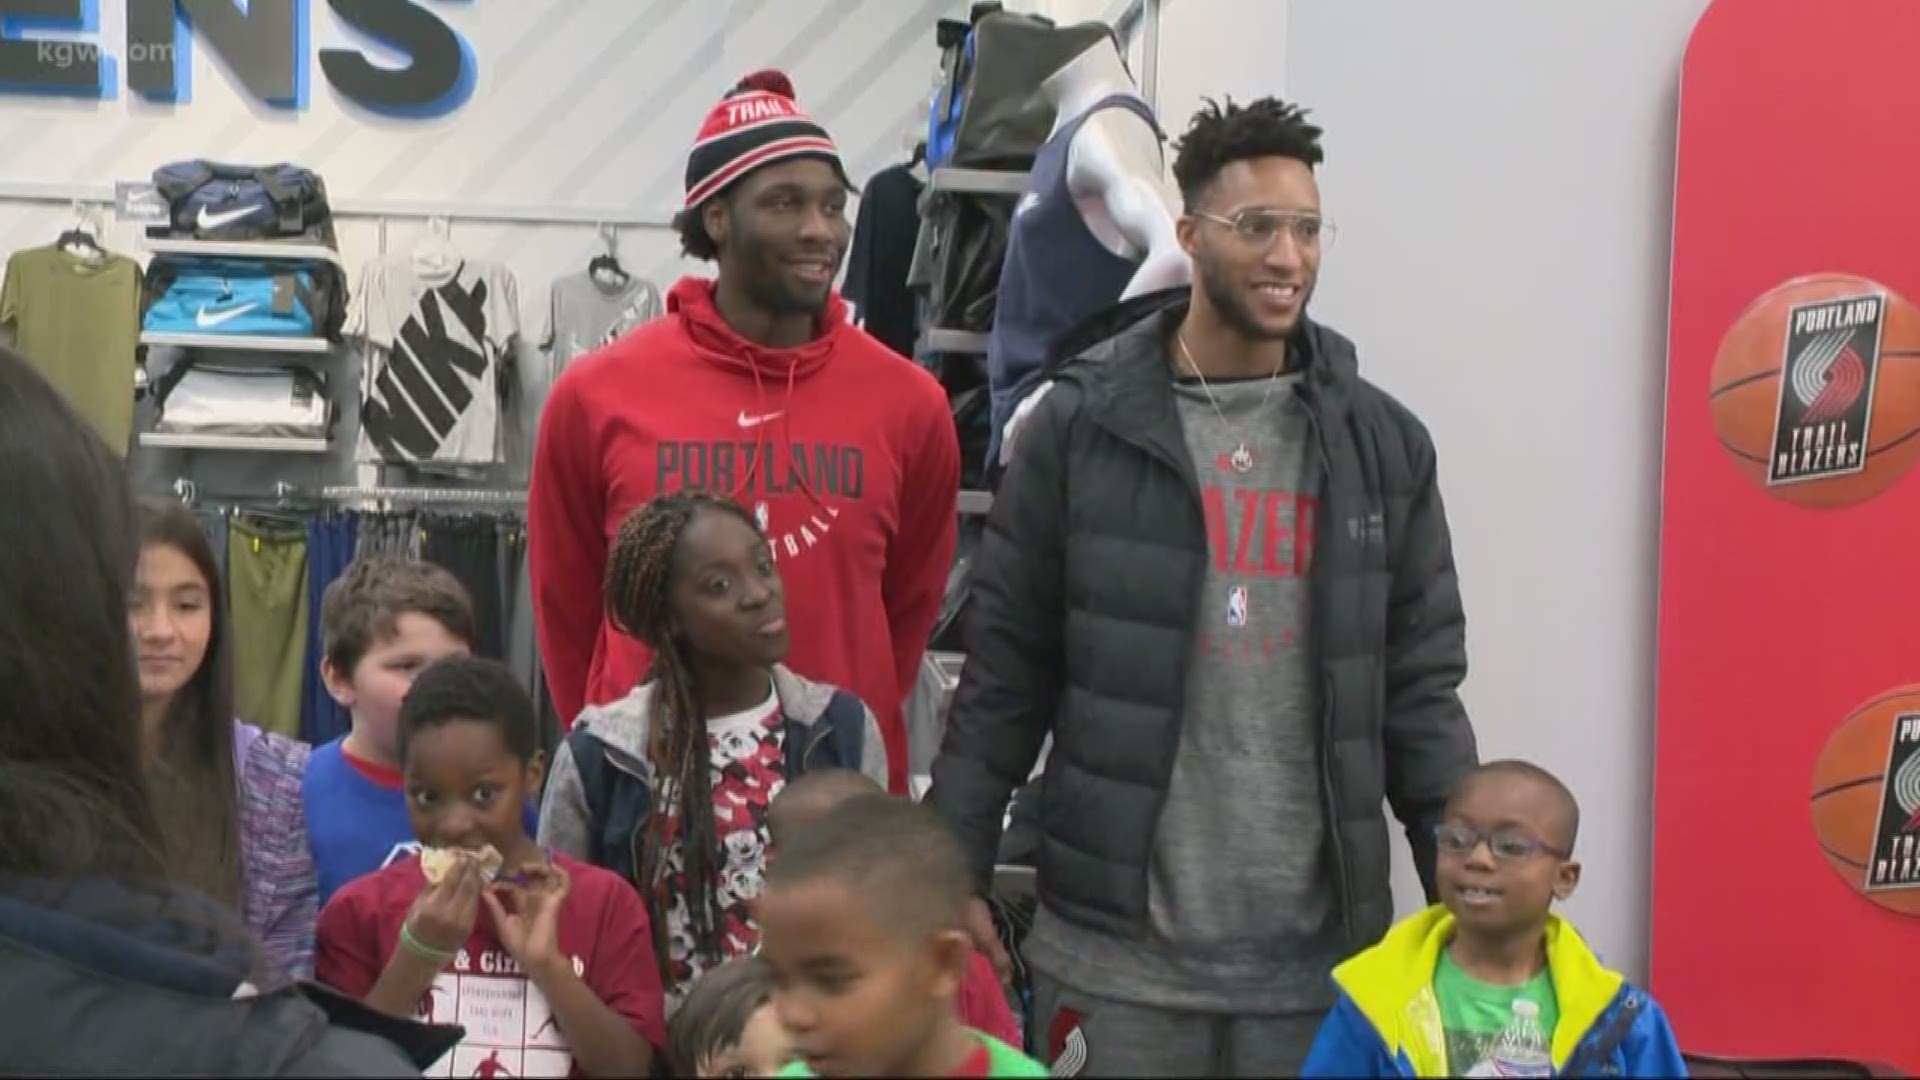 Trail Blazers players Evan Turner and Caleb Swanigan were out meeting fans Sunday at a Fred Meyer in Southwest Portland.